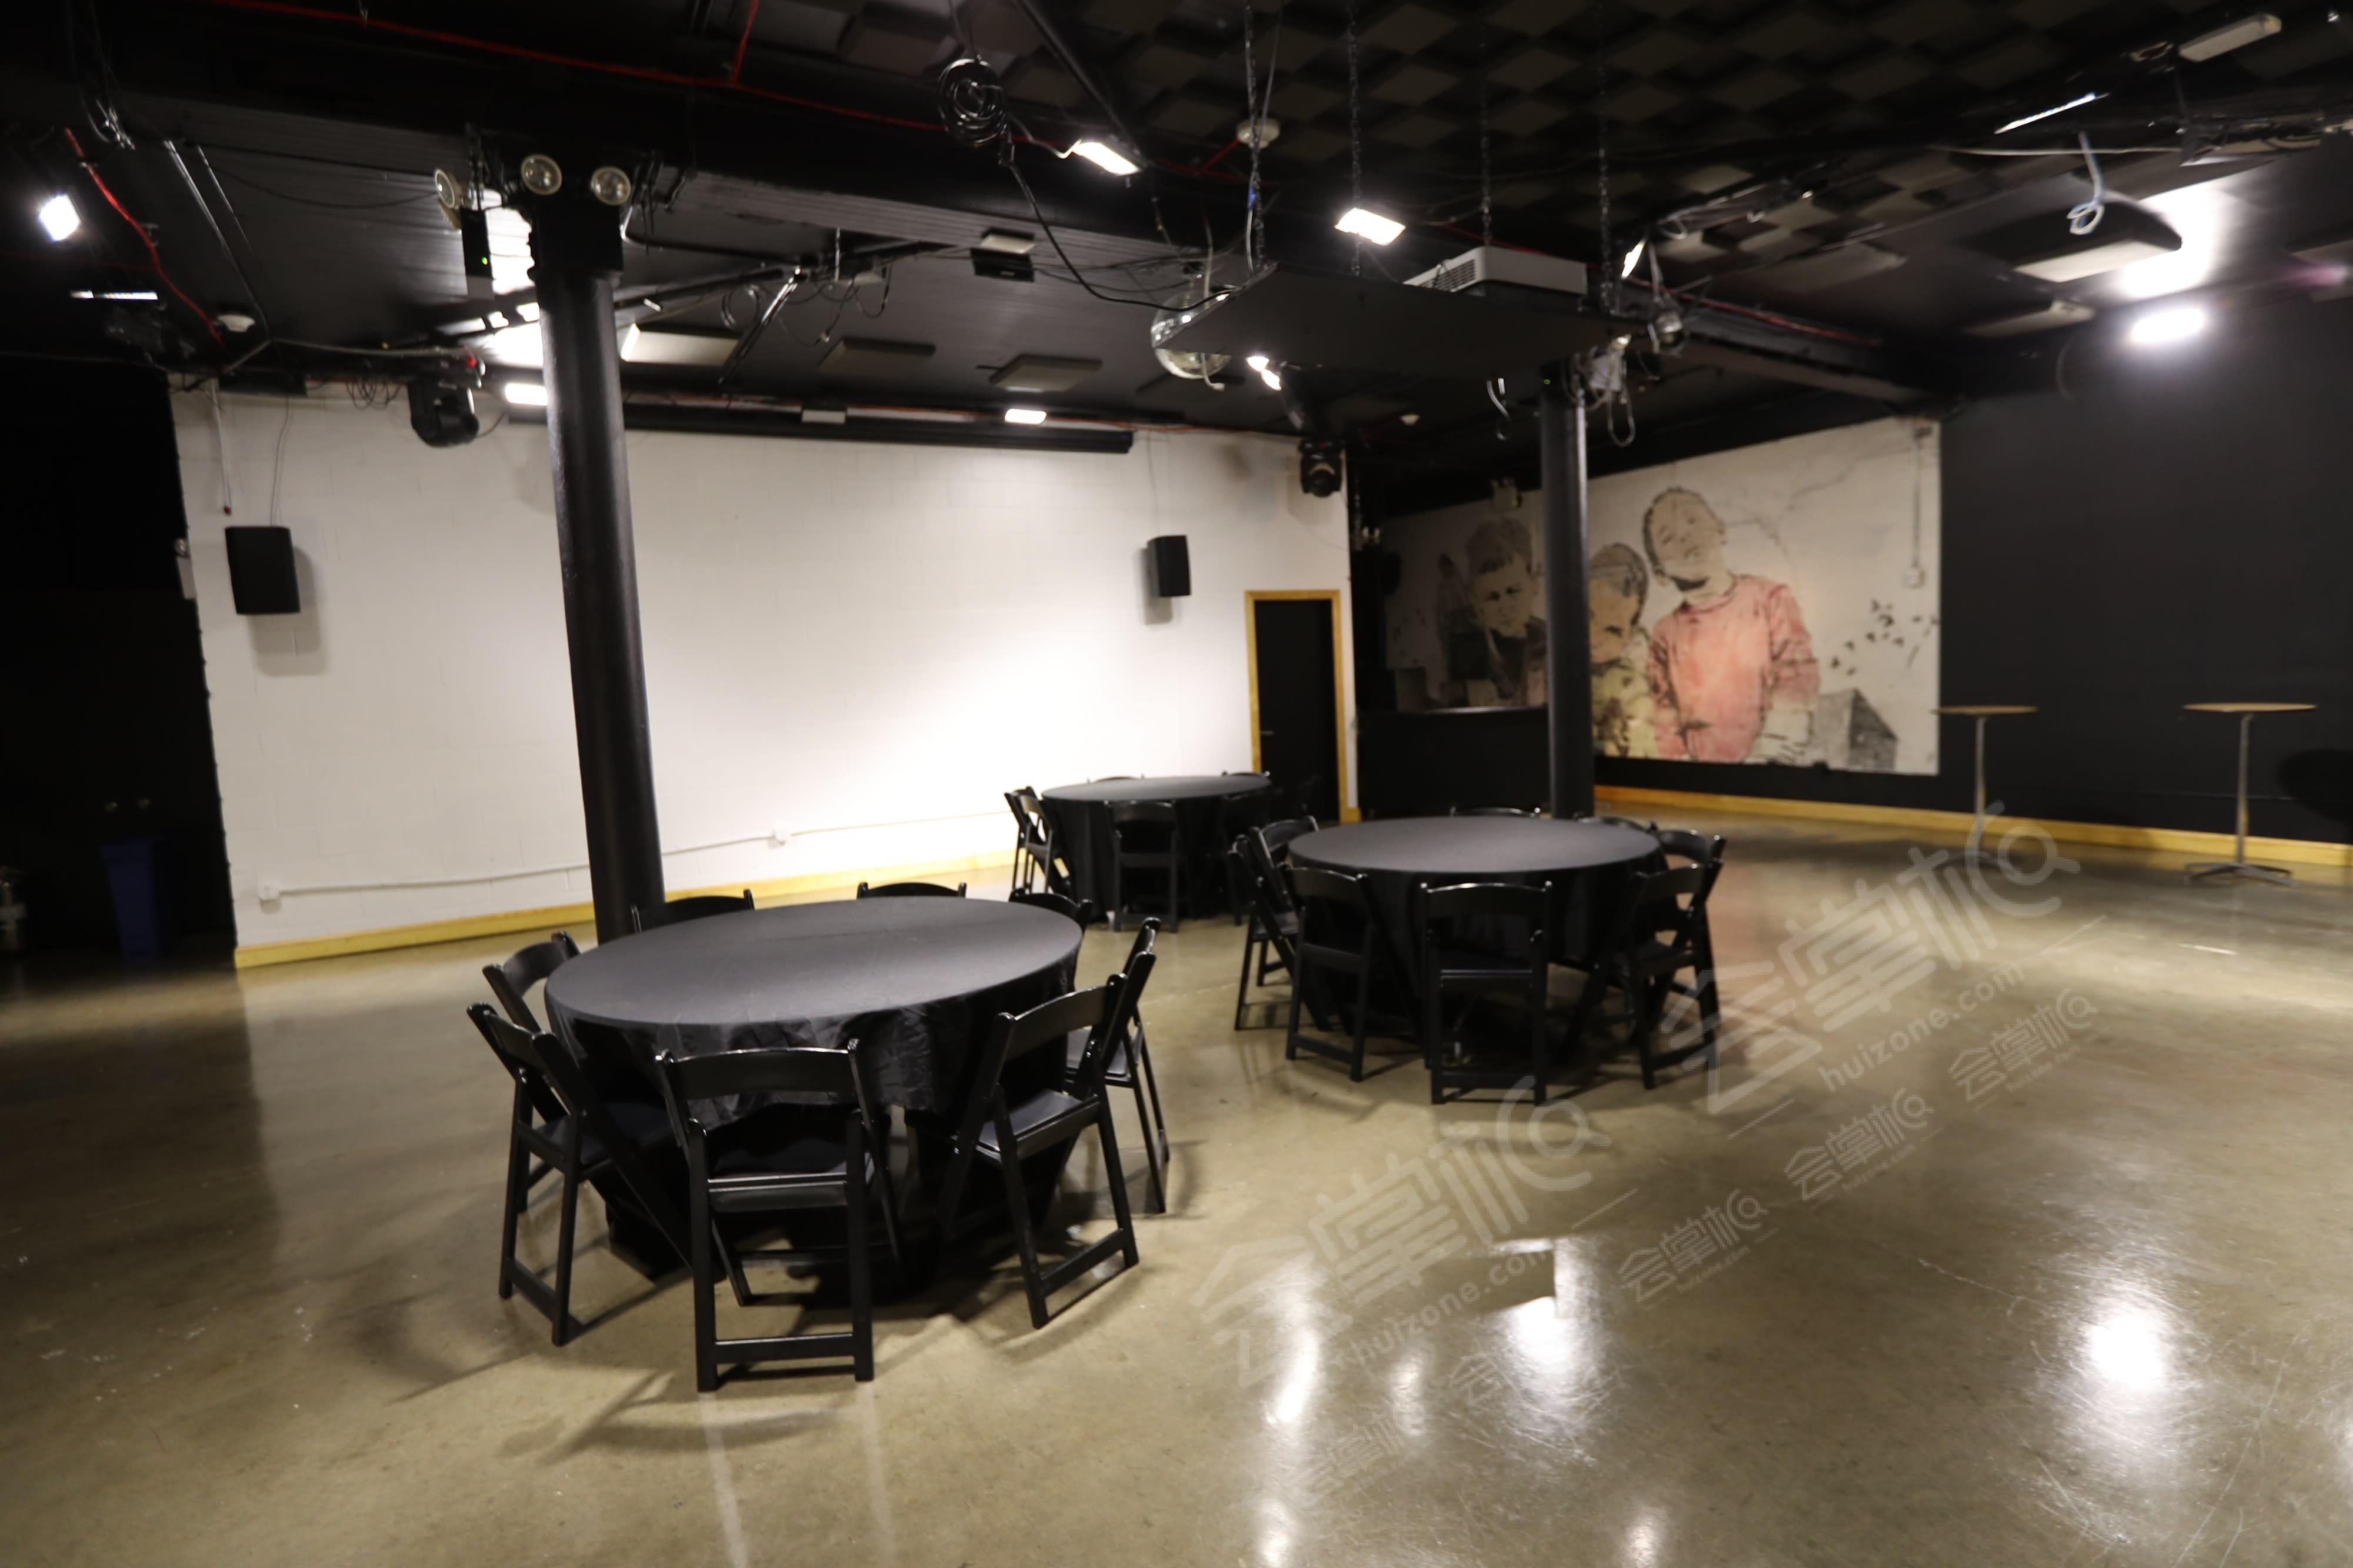 Event space conveniently located in Tribeca/Chinatown